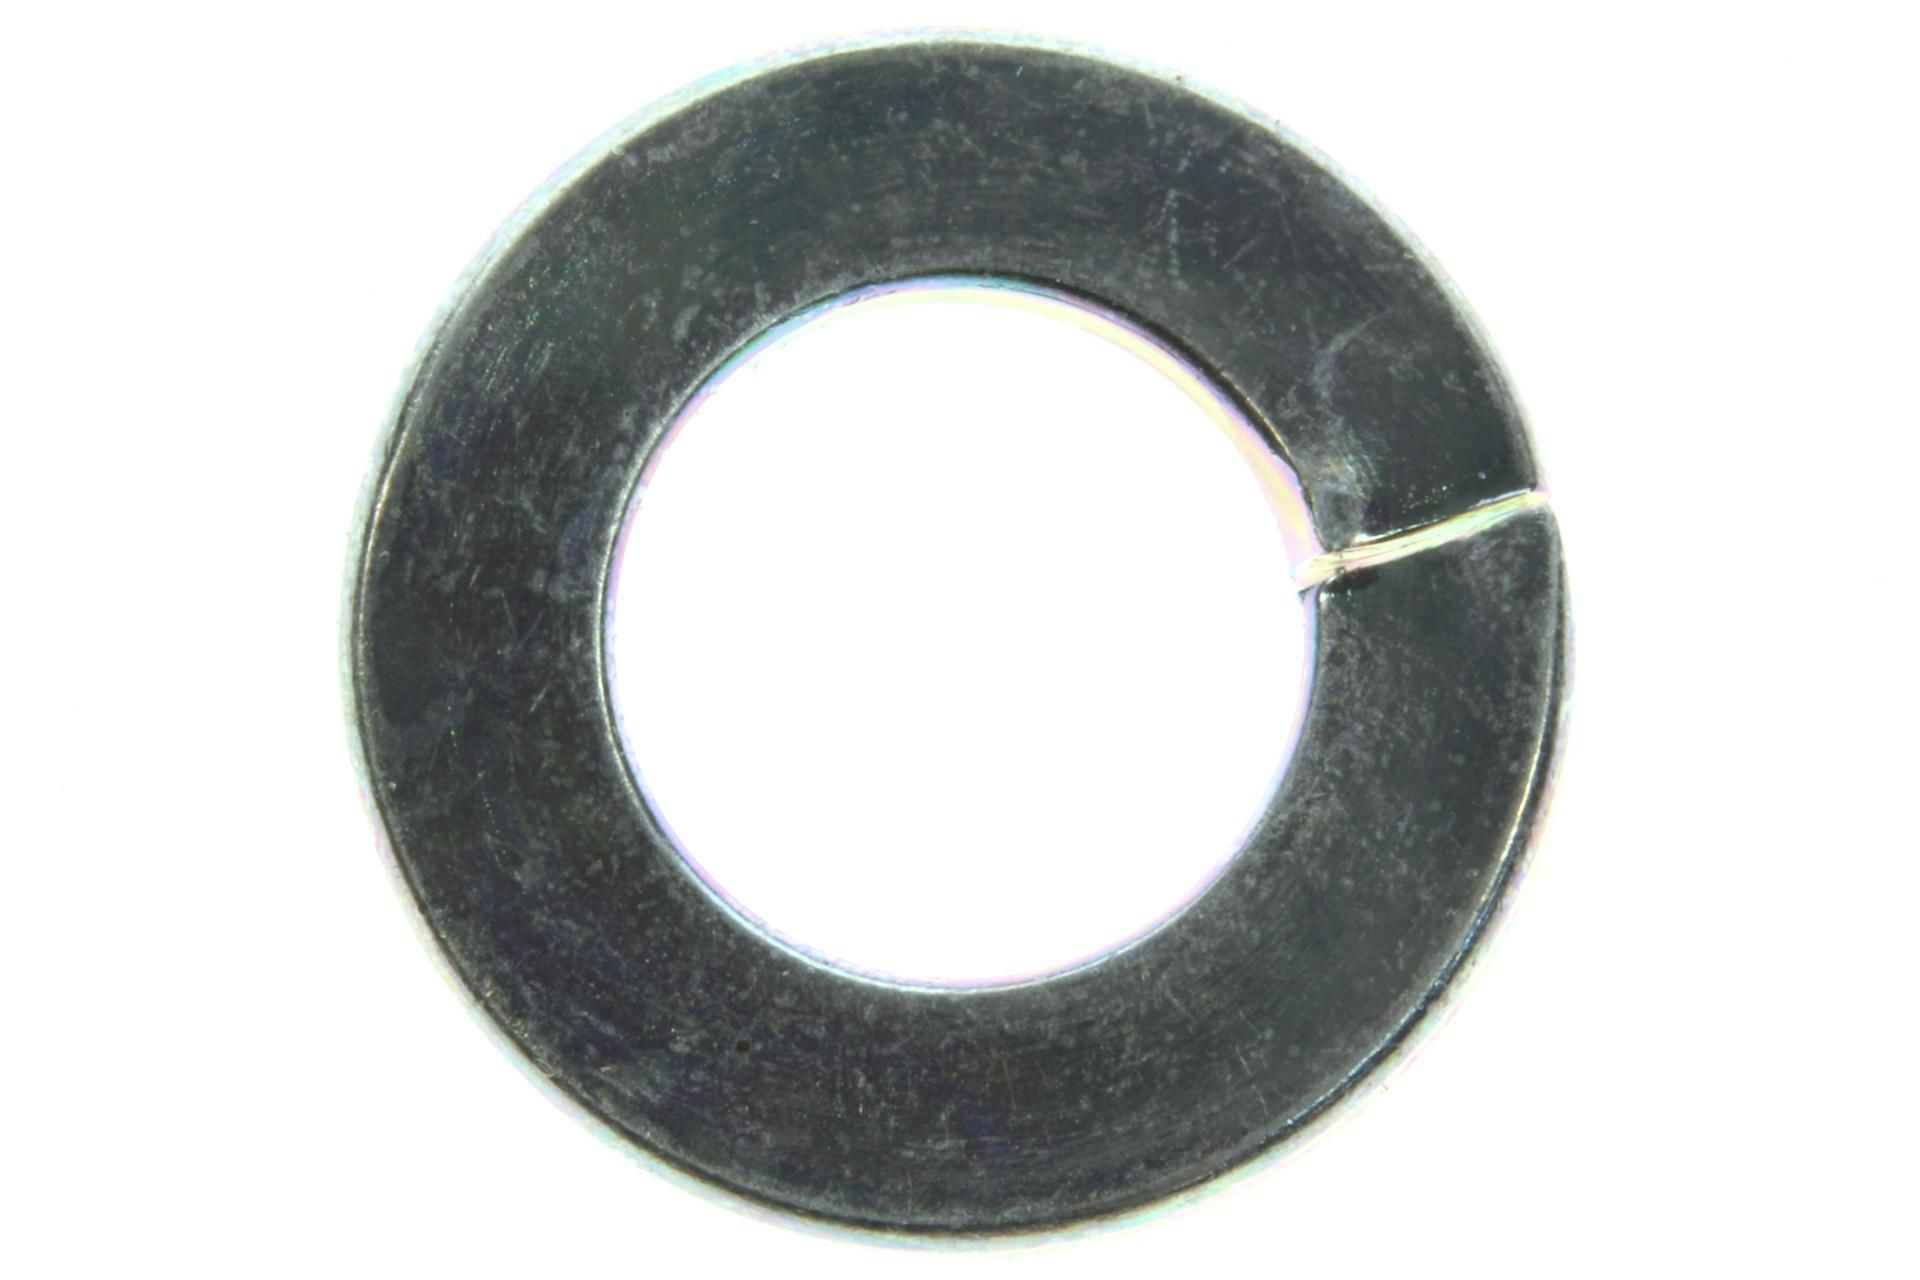 08321-01063 Superseded by 08321-0106A - WASHER,LOCK